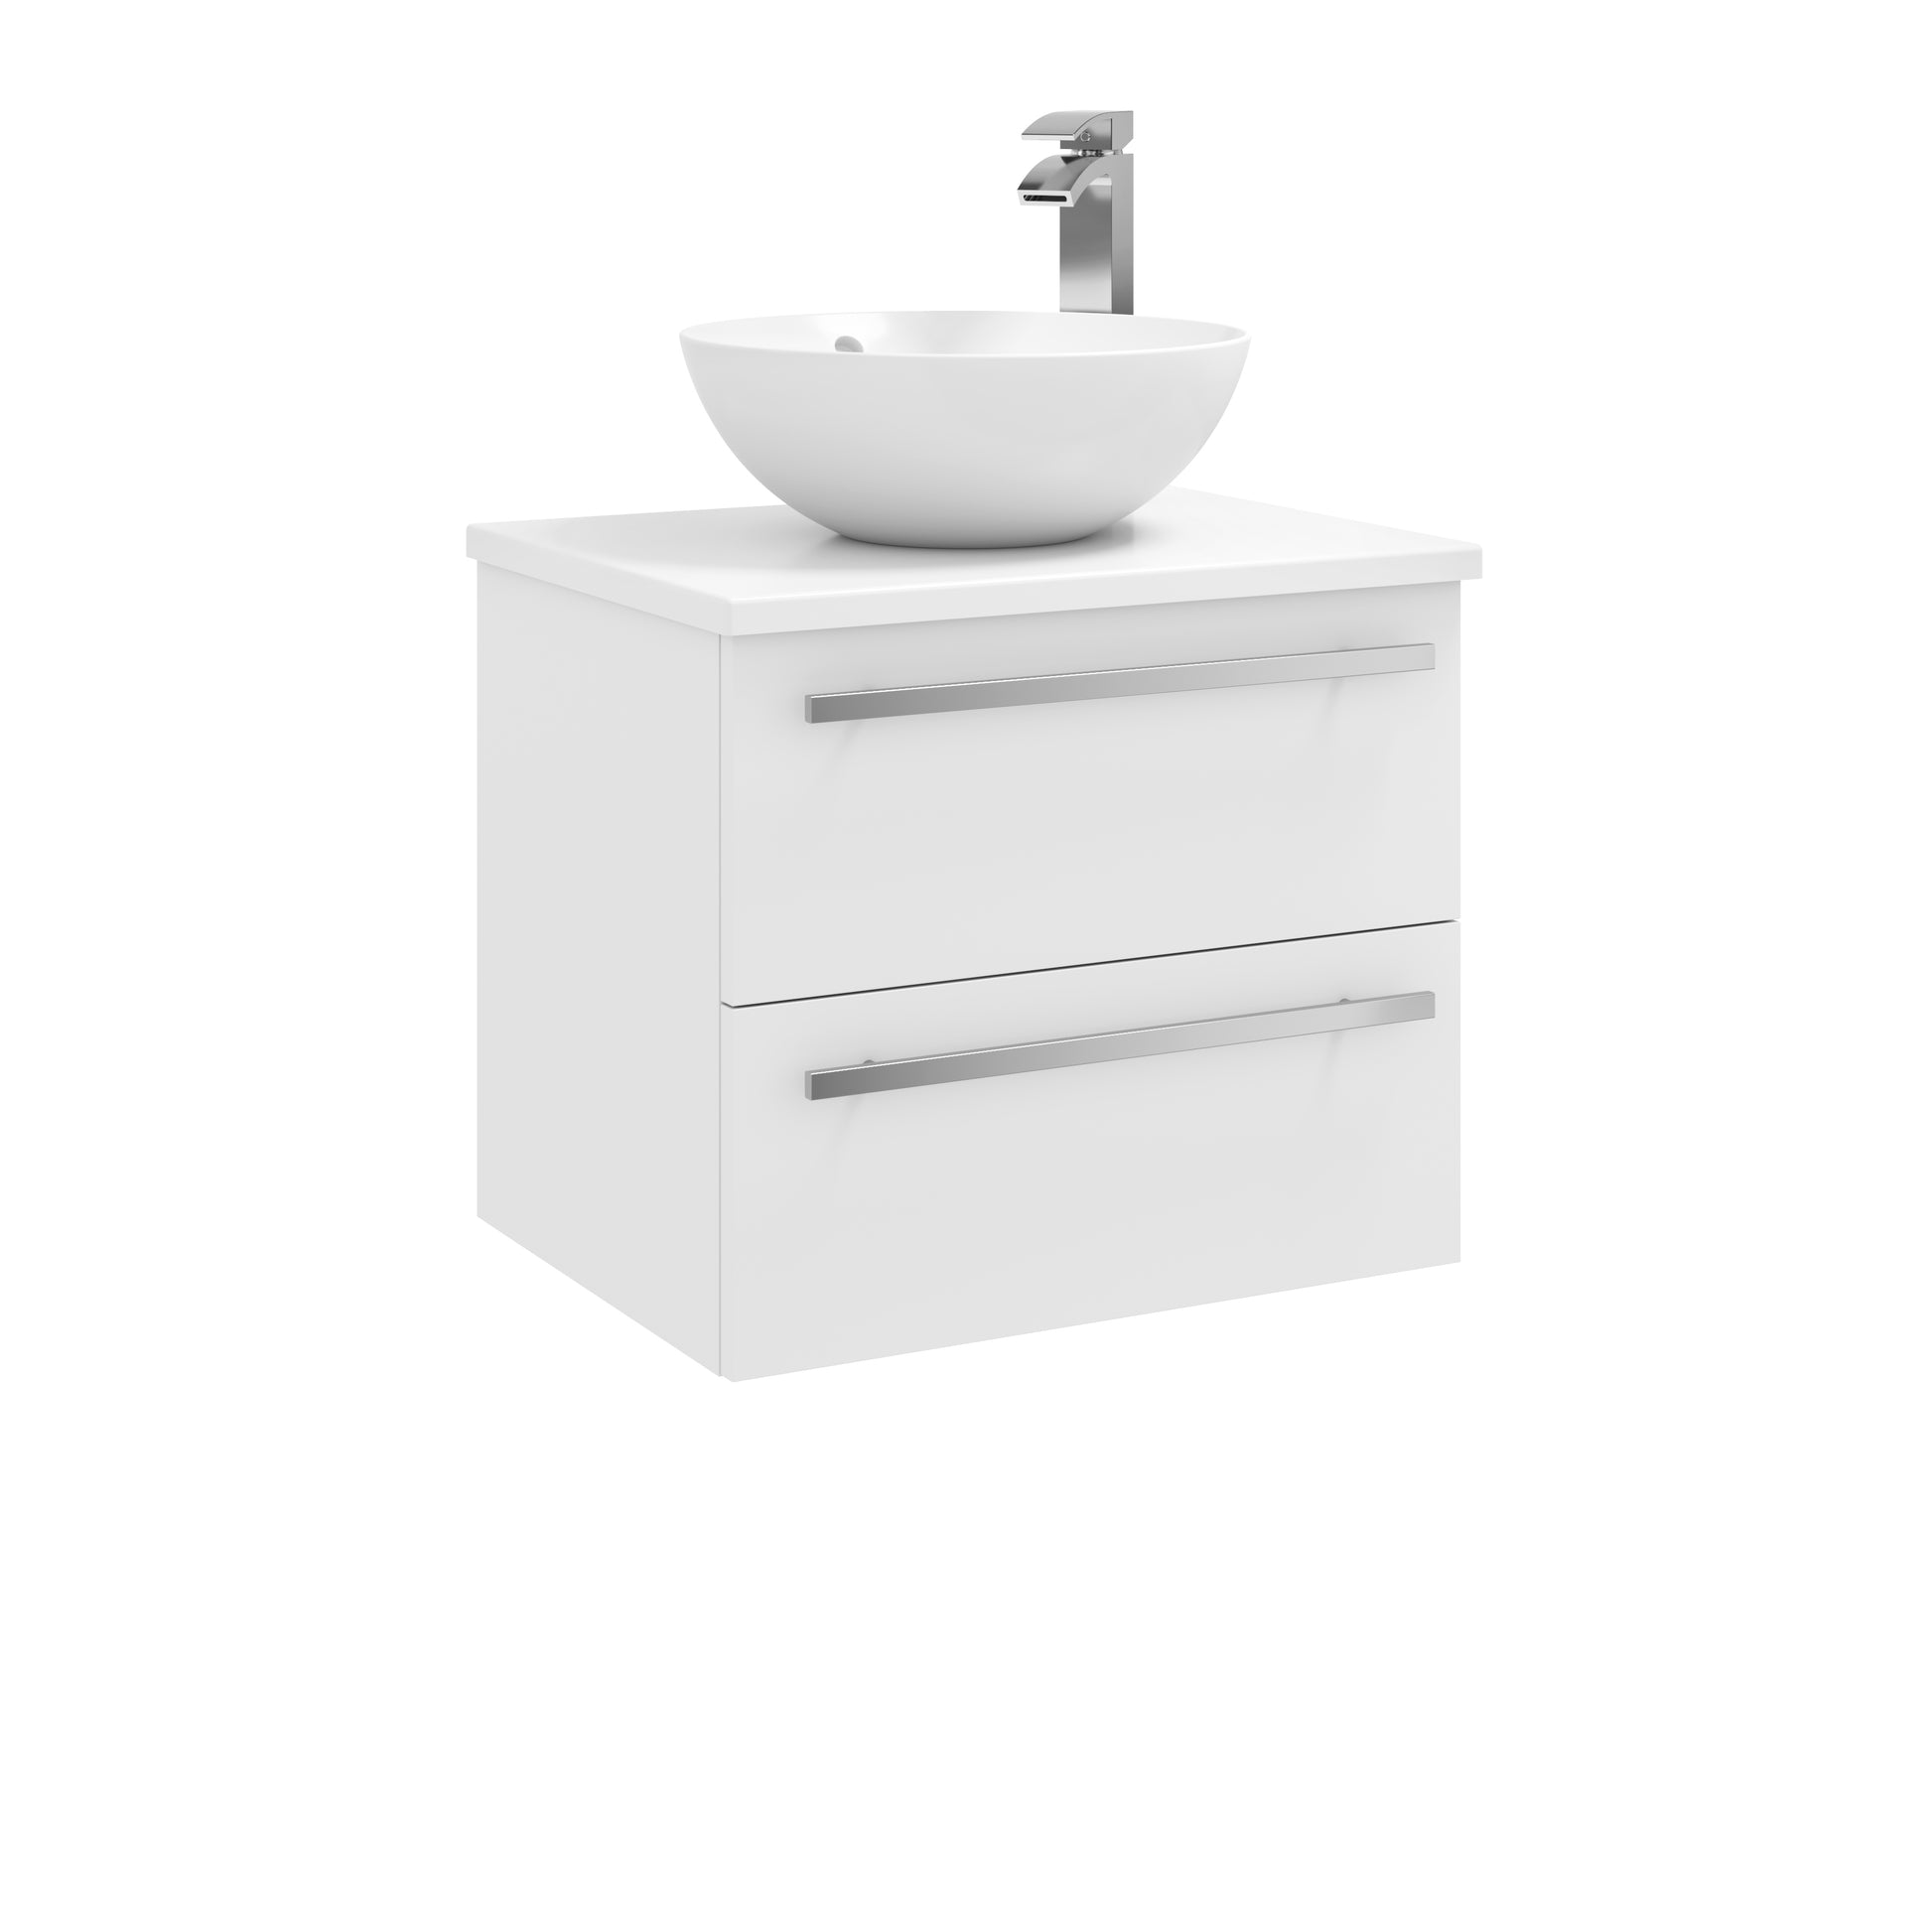 Purity 2 Drawer Unit, Ceramic Worktop & Sit on Bowl - Wall Mounted / White Gloss - Purity - Bliss Bathroom Supplies Ltd -